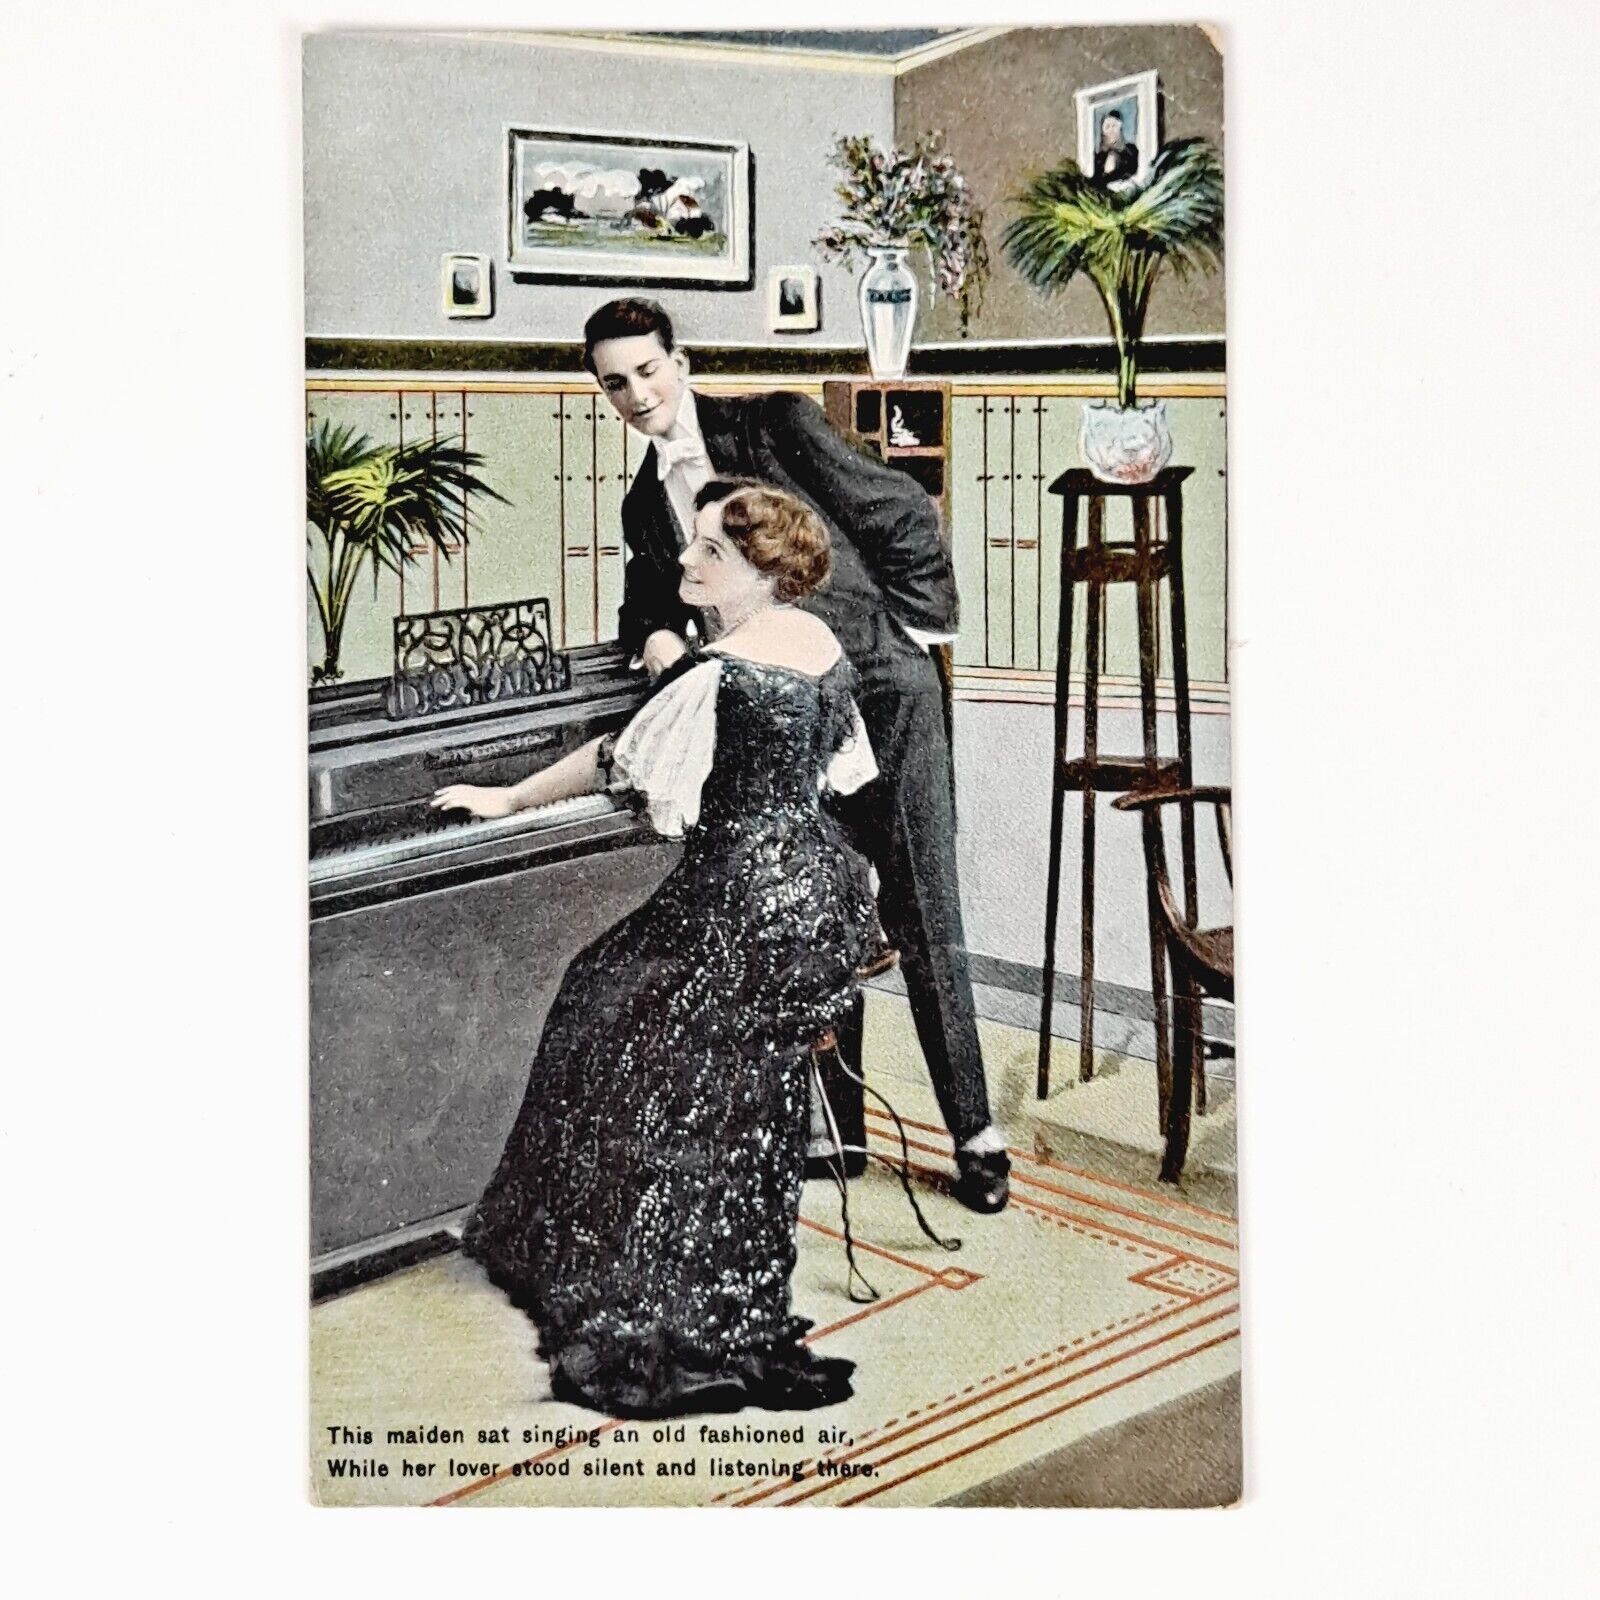 ANTIQUE 1909 POST CARD LOVE & ROMANCE COURTSHIP PIANO SERENADE POSTCARD - POSTED